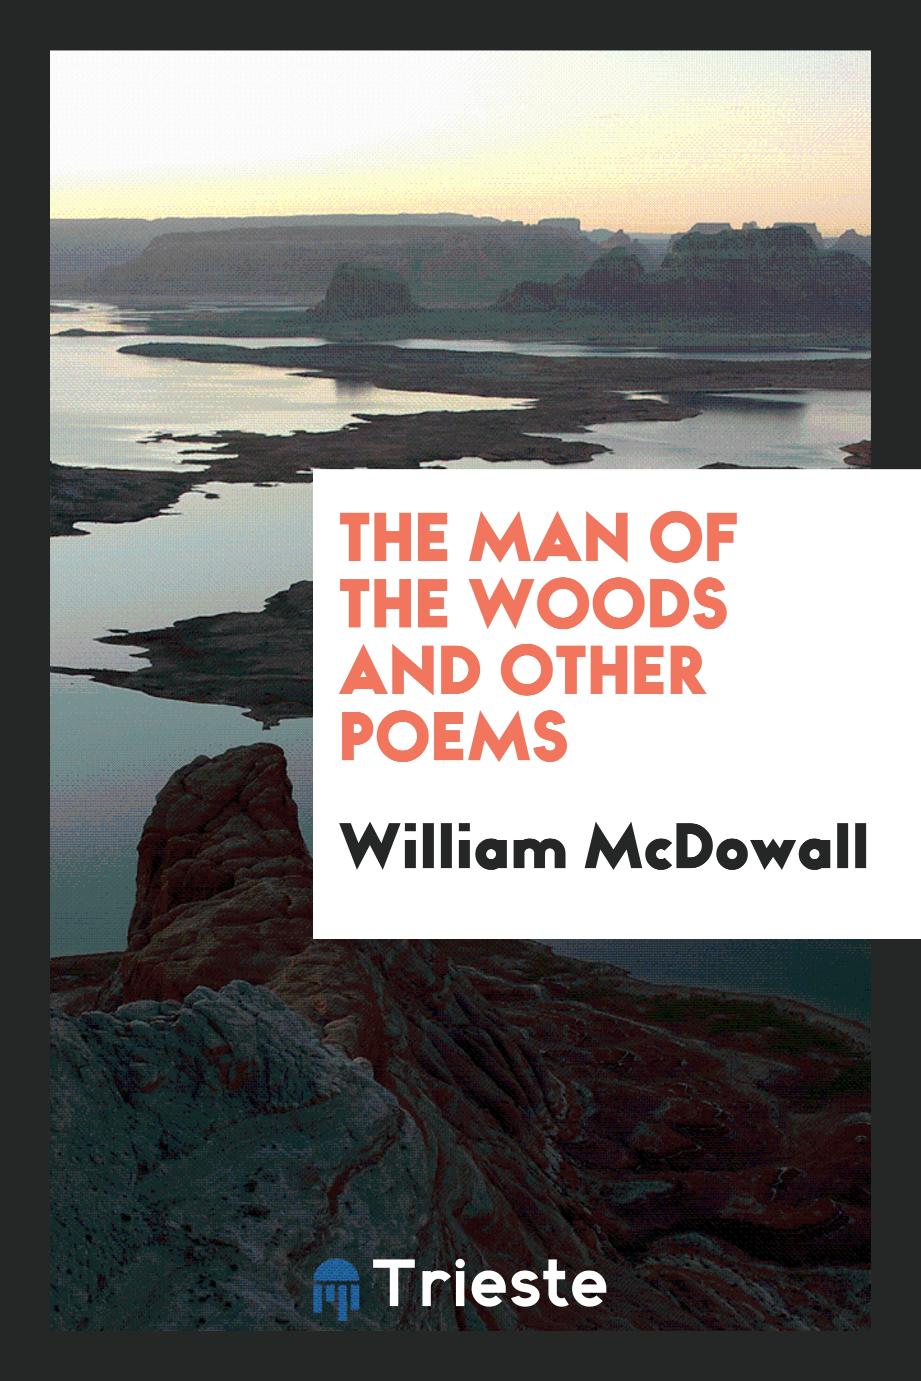 The man of the woods and other poems